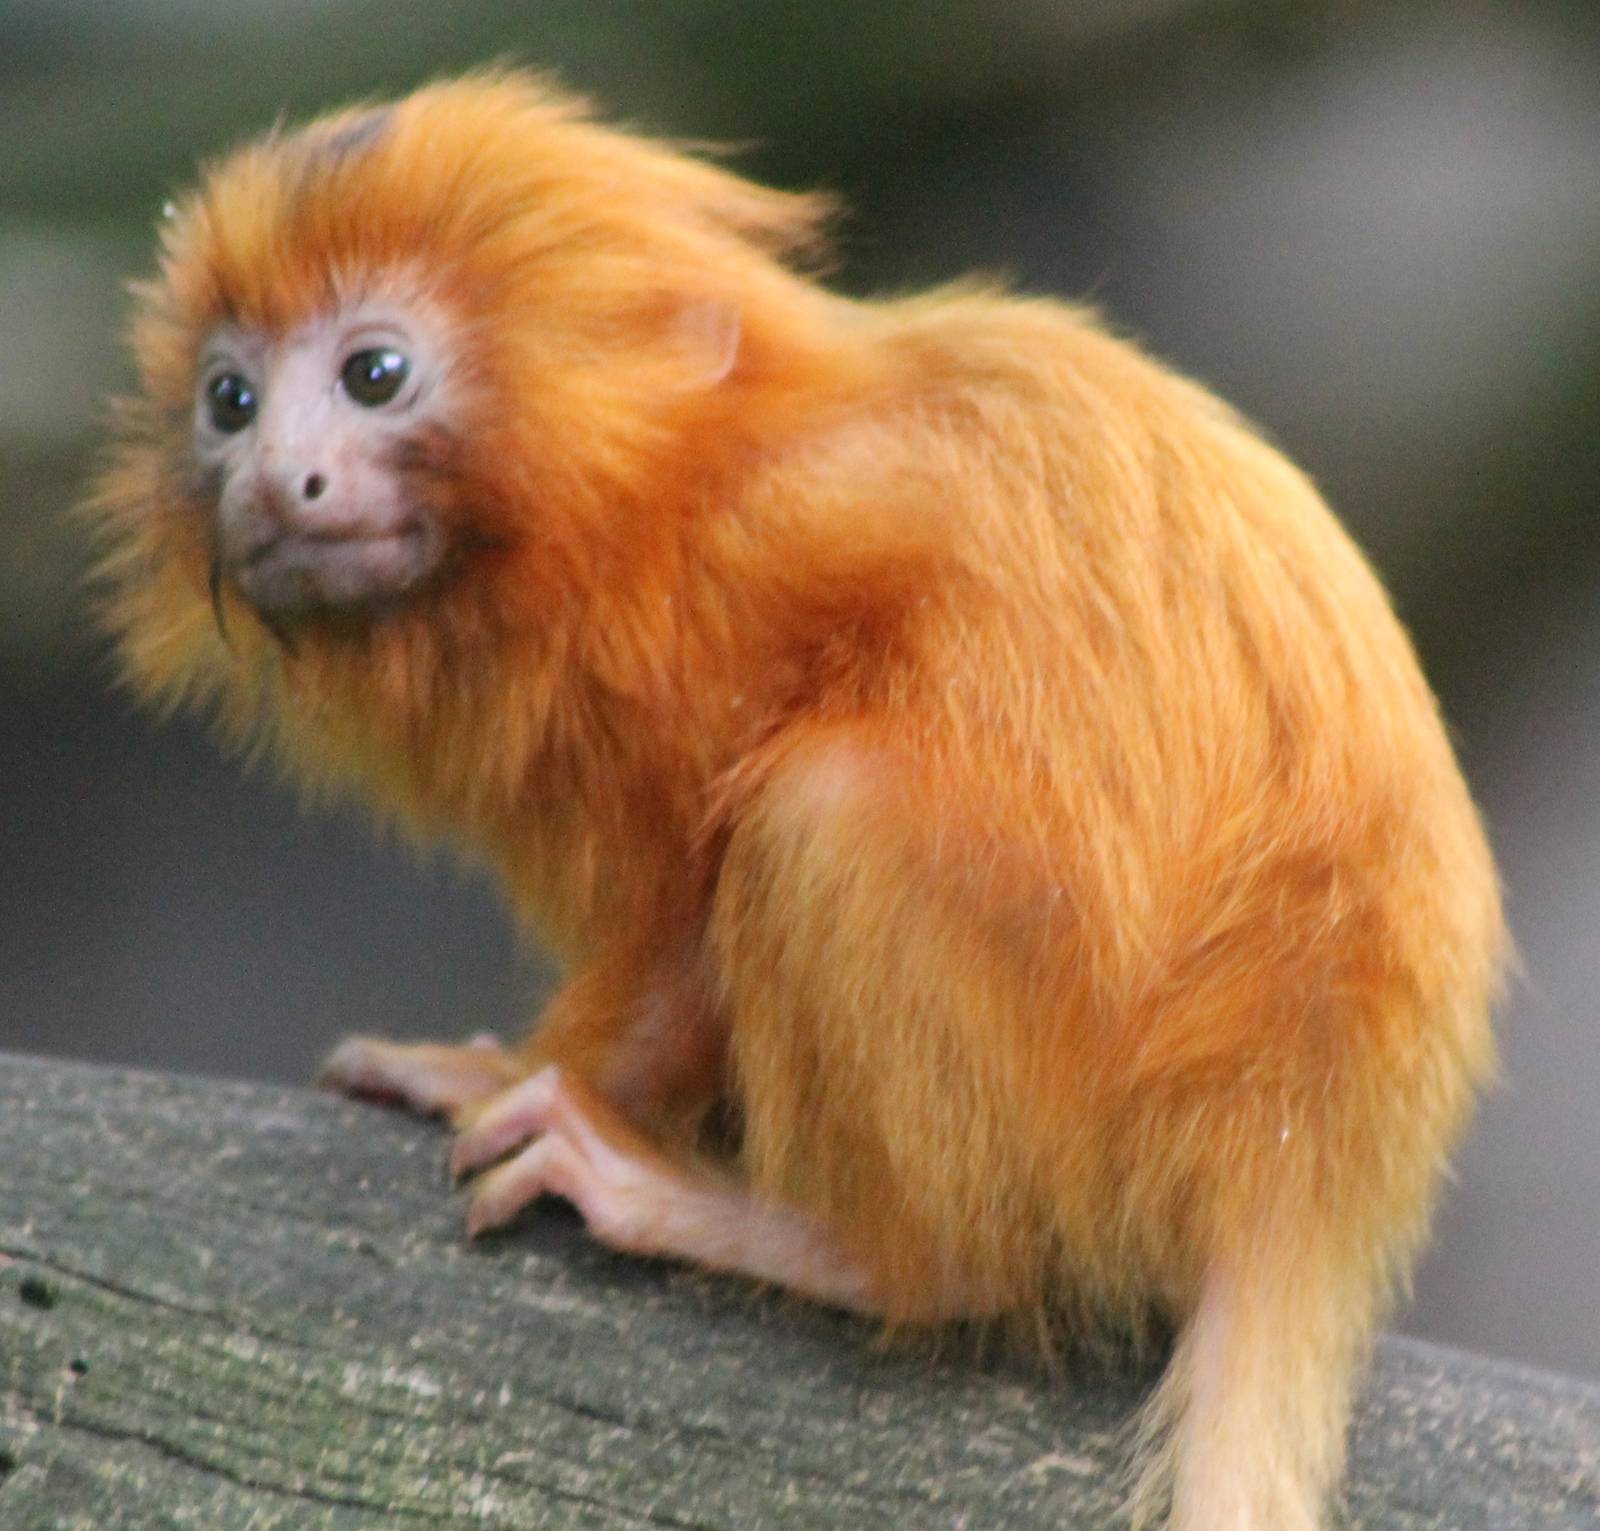 Brazilian environmentalists have launched a campaign to try to get Rio 2016 to choose the endangered golden lion tamarin as its mascot ©Getty Images